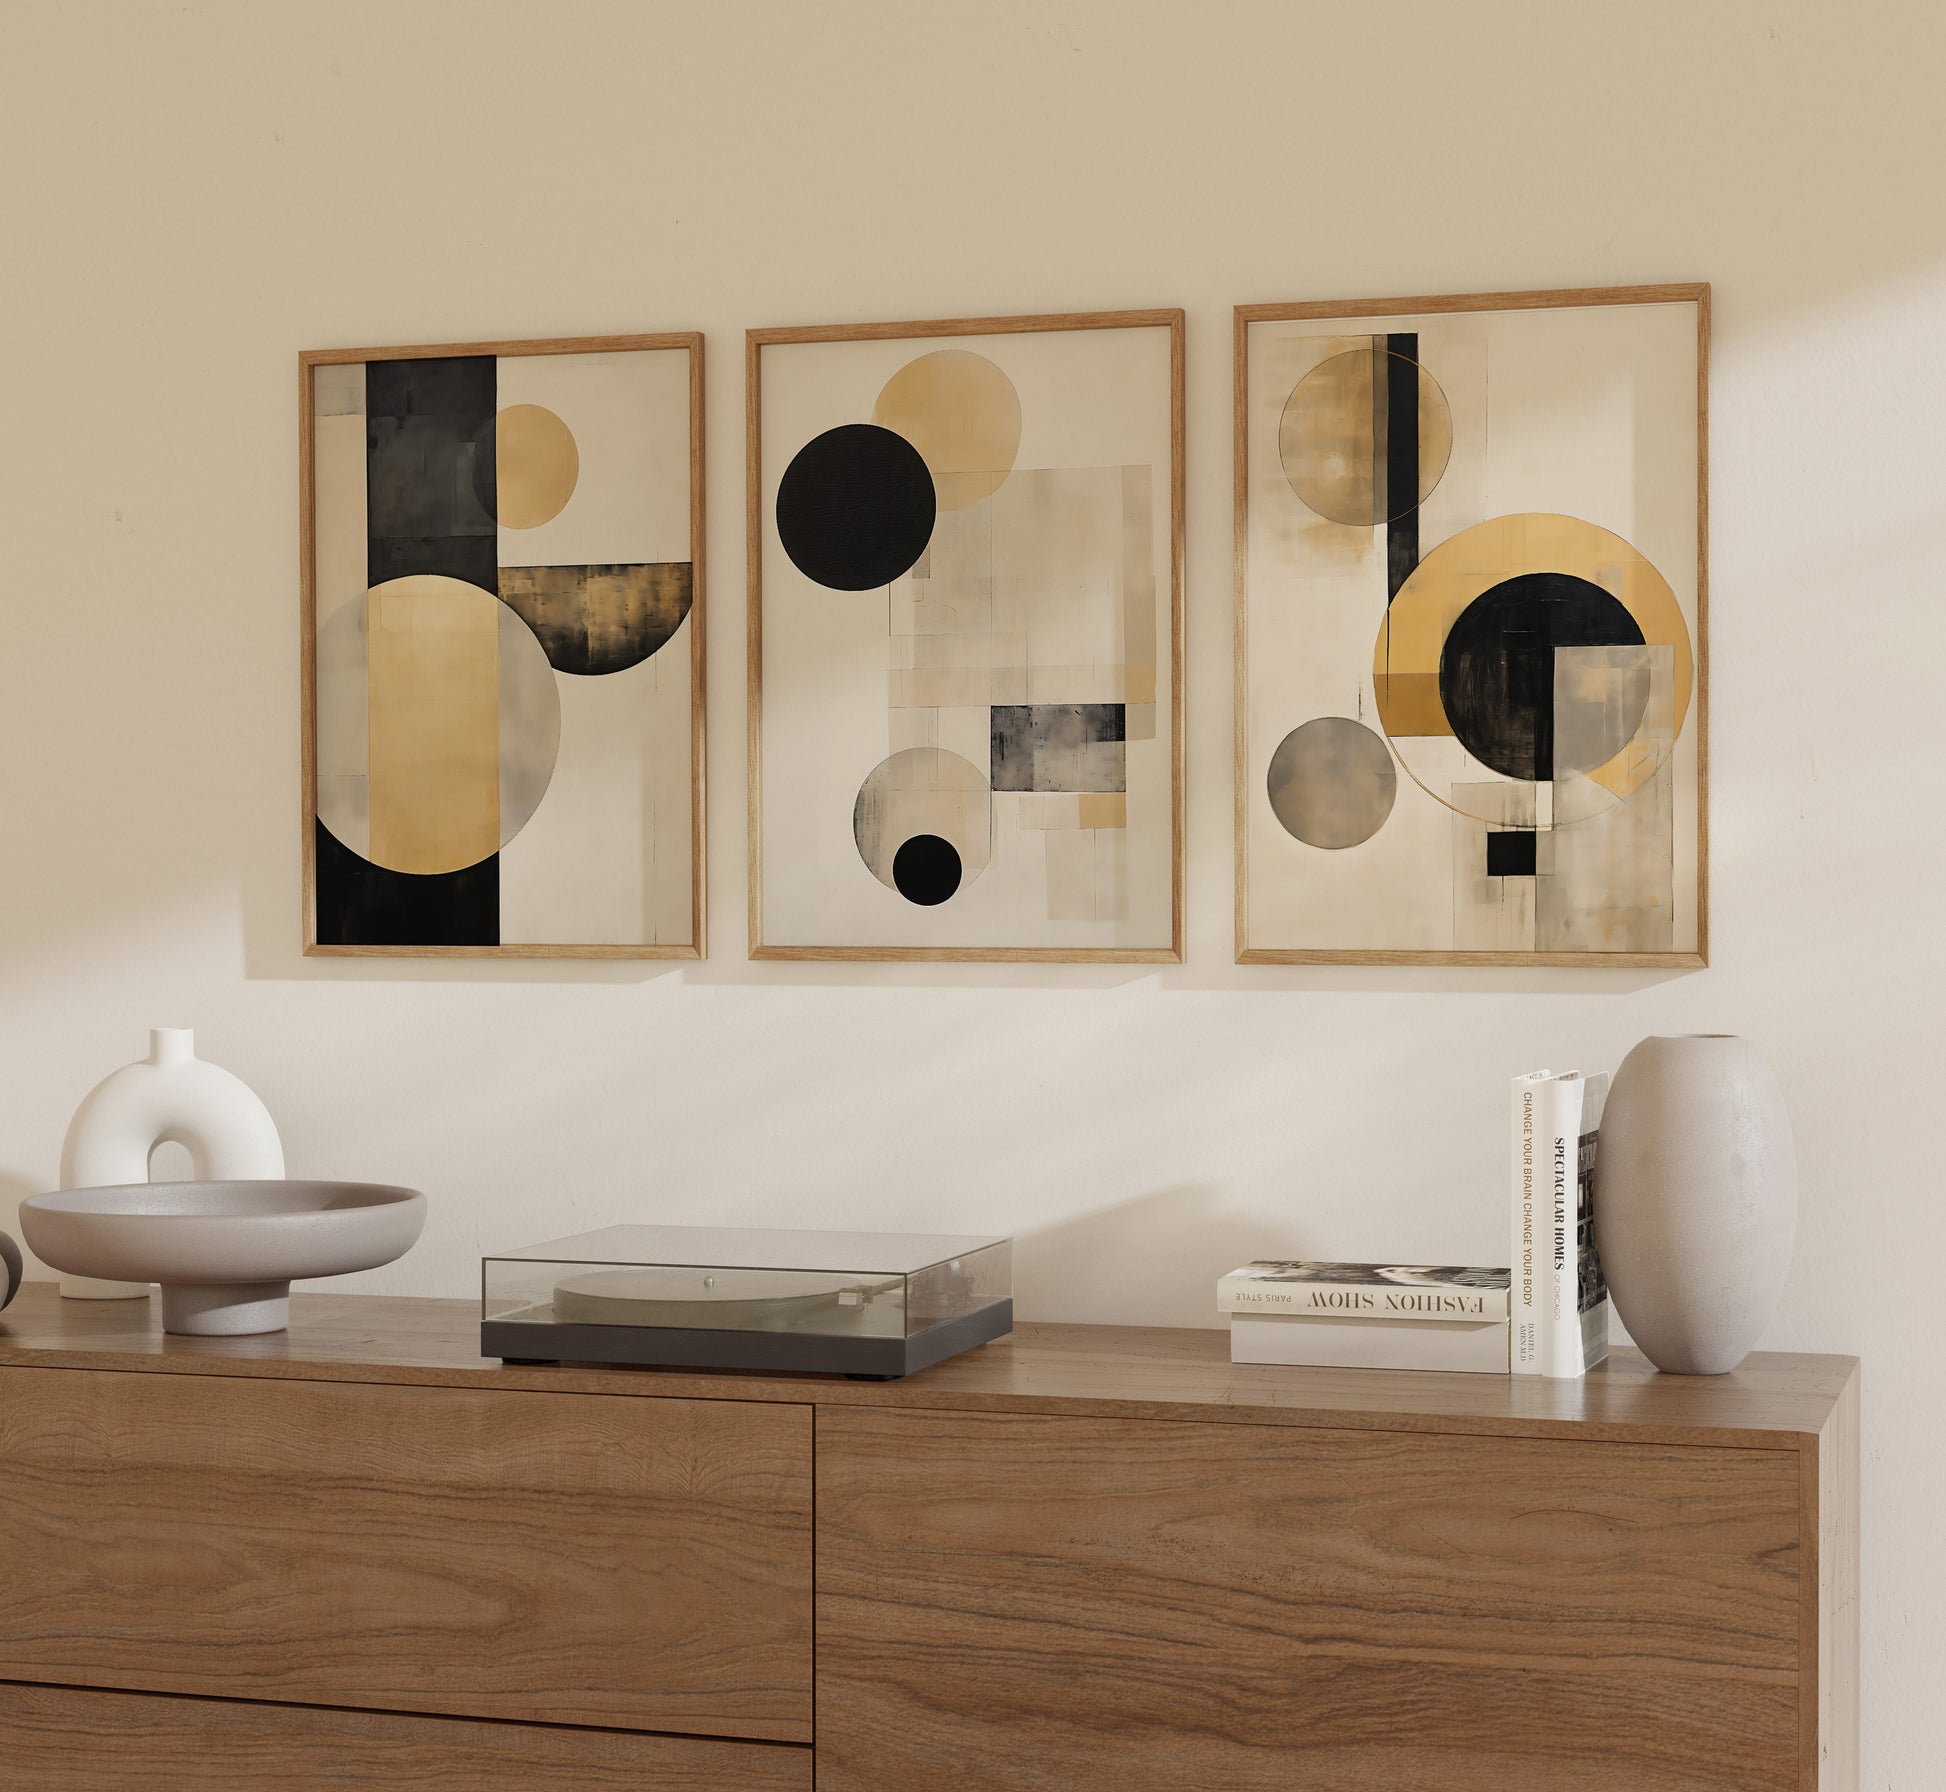 Three framed abstract art pieces on a wall above a wooden sideboard with decorative items.